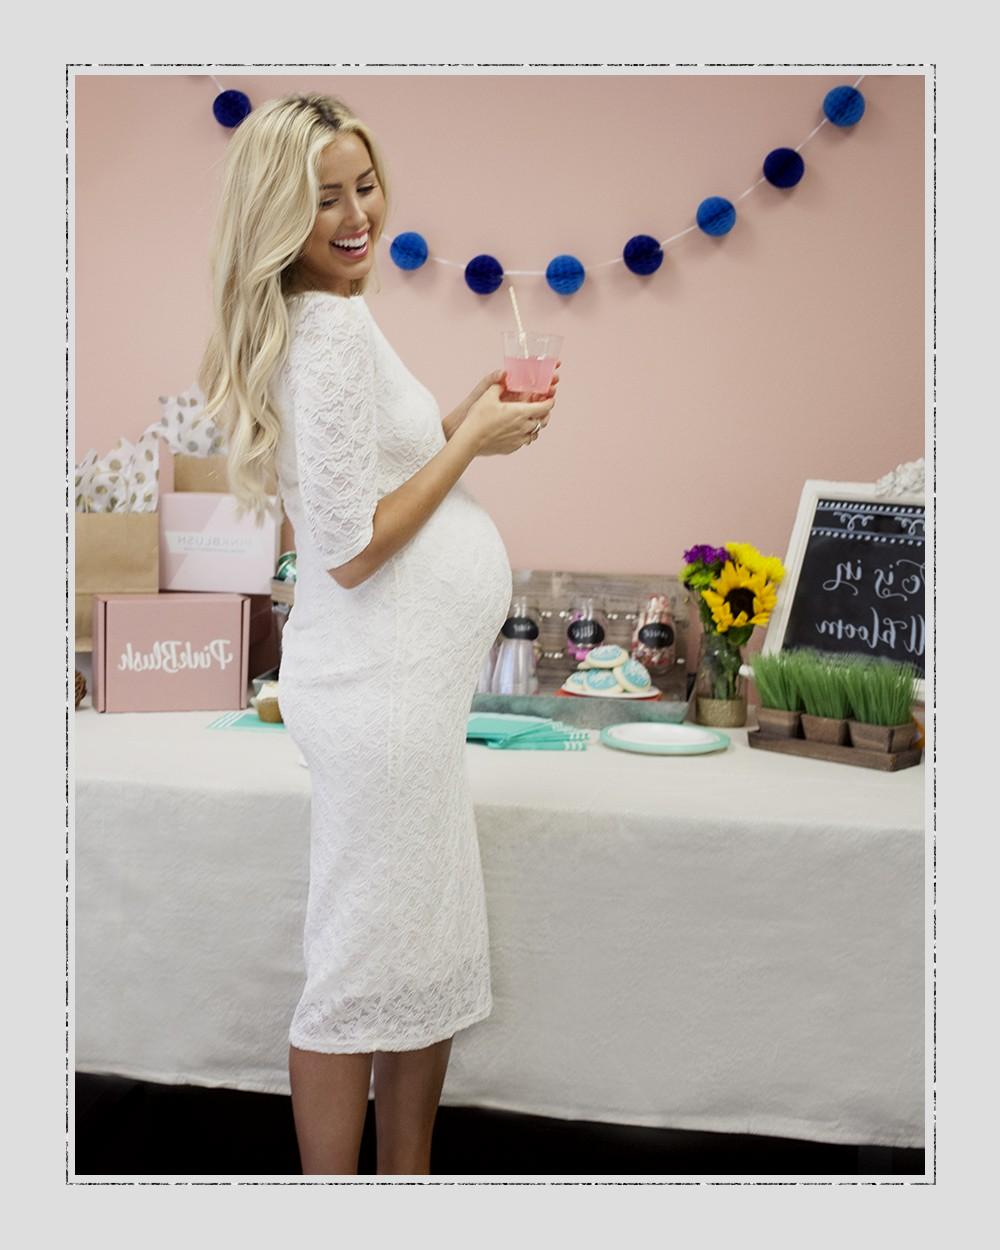 Full Size of Baby Shower:baby Shower Dresses Indian Maternity Maxi Dress Cheap Maternity Dresses For Baby Showers Trendy Maternity Clothes Cute Baby Shower Outfits For Mom Maternity Maxi Dresses Maternity Dresses Maternity Gown Style